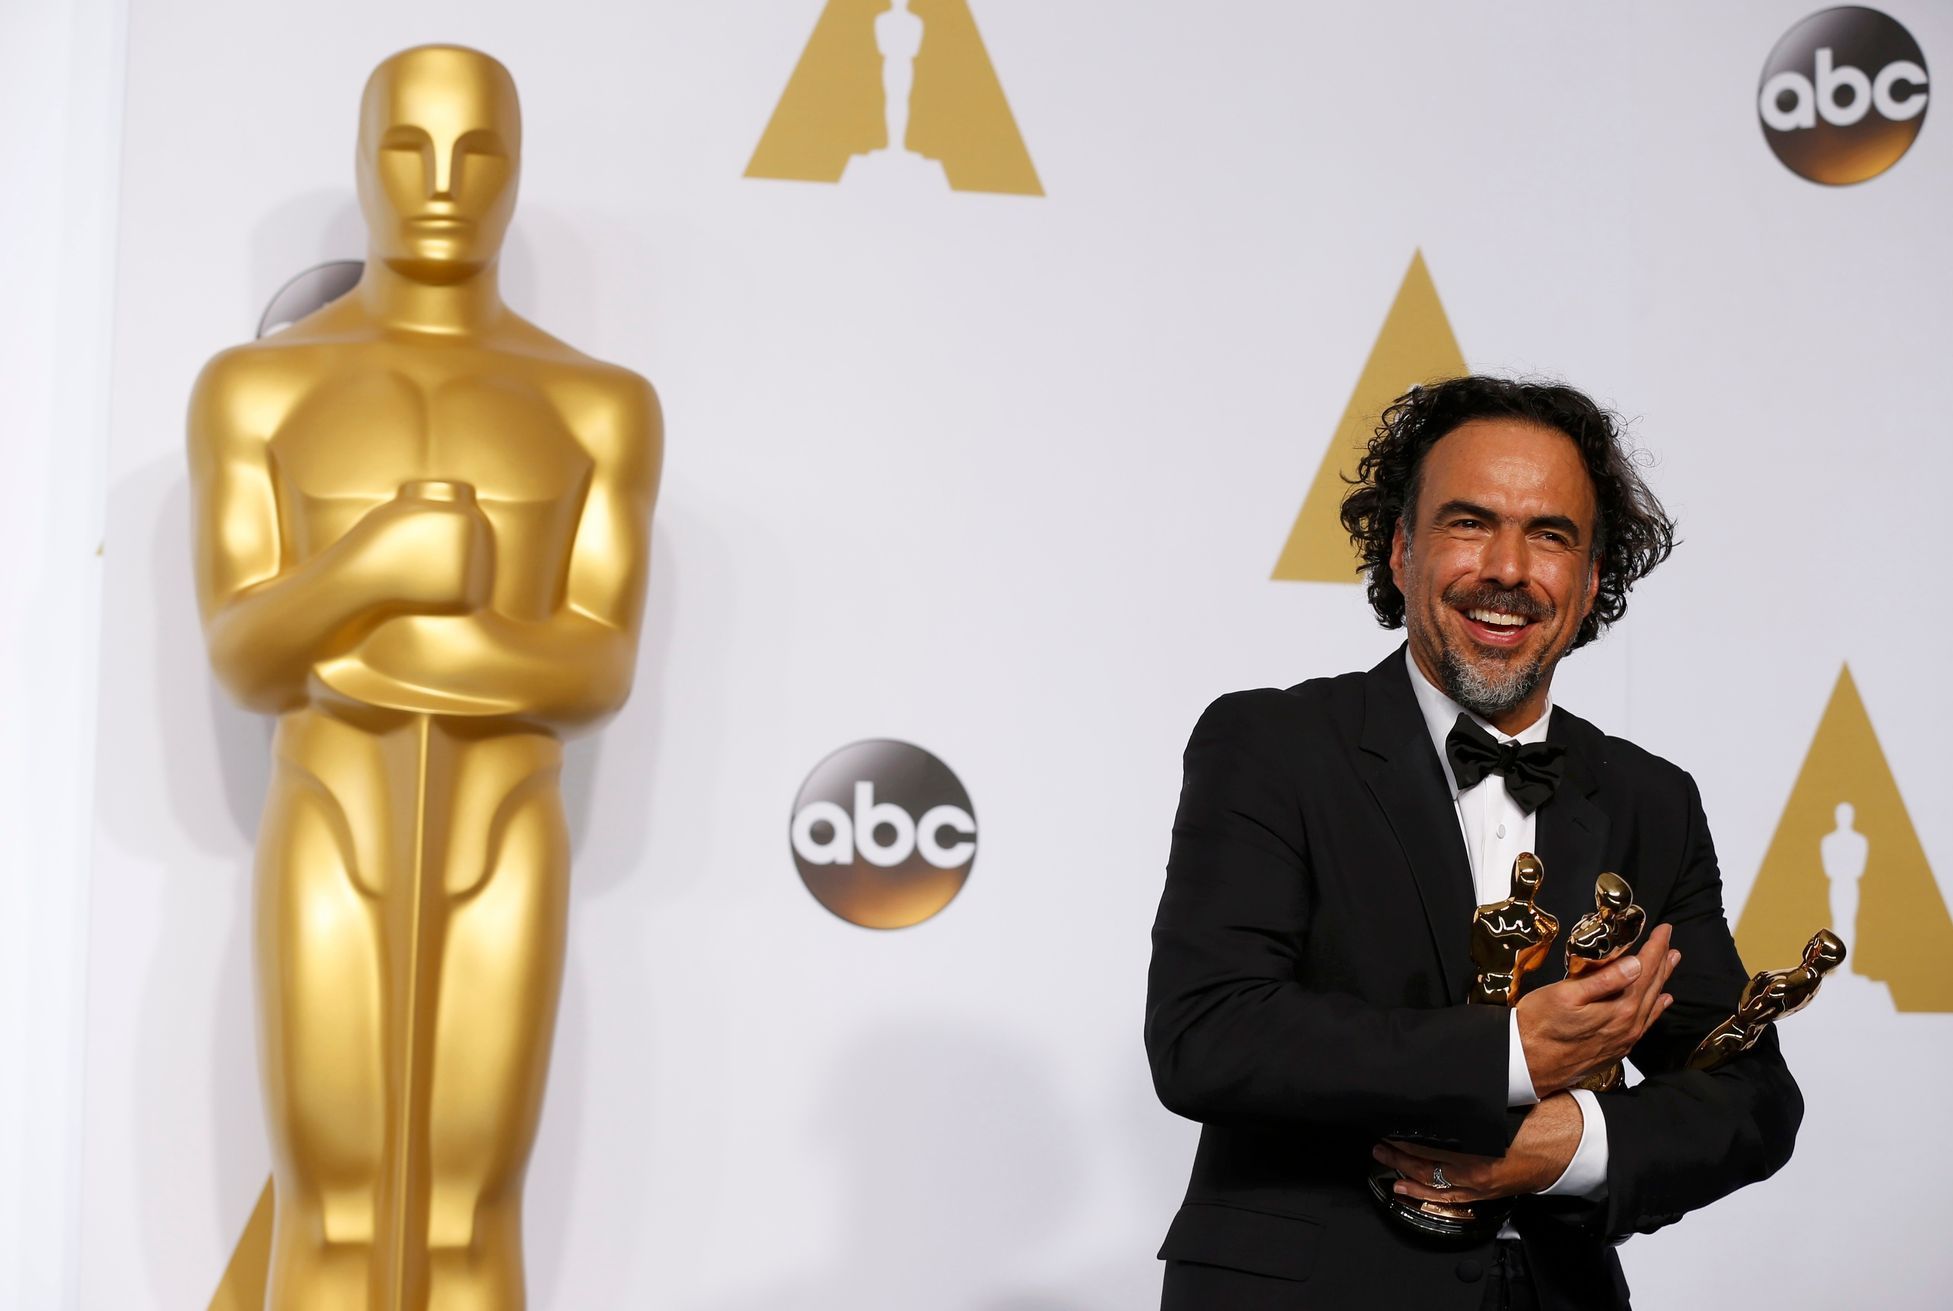 Director Alejandro Inarritu poses with the Oscars for Best Director, Best Original Screenplay and Best Picture at the 87th Academy Awards in Hollywood, California